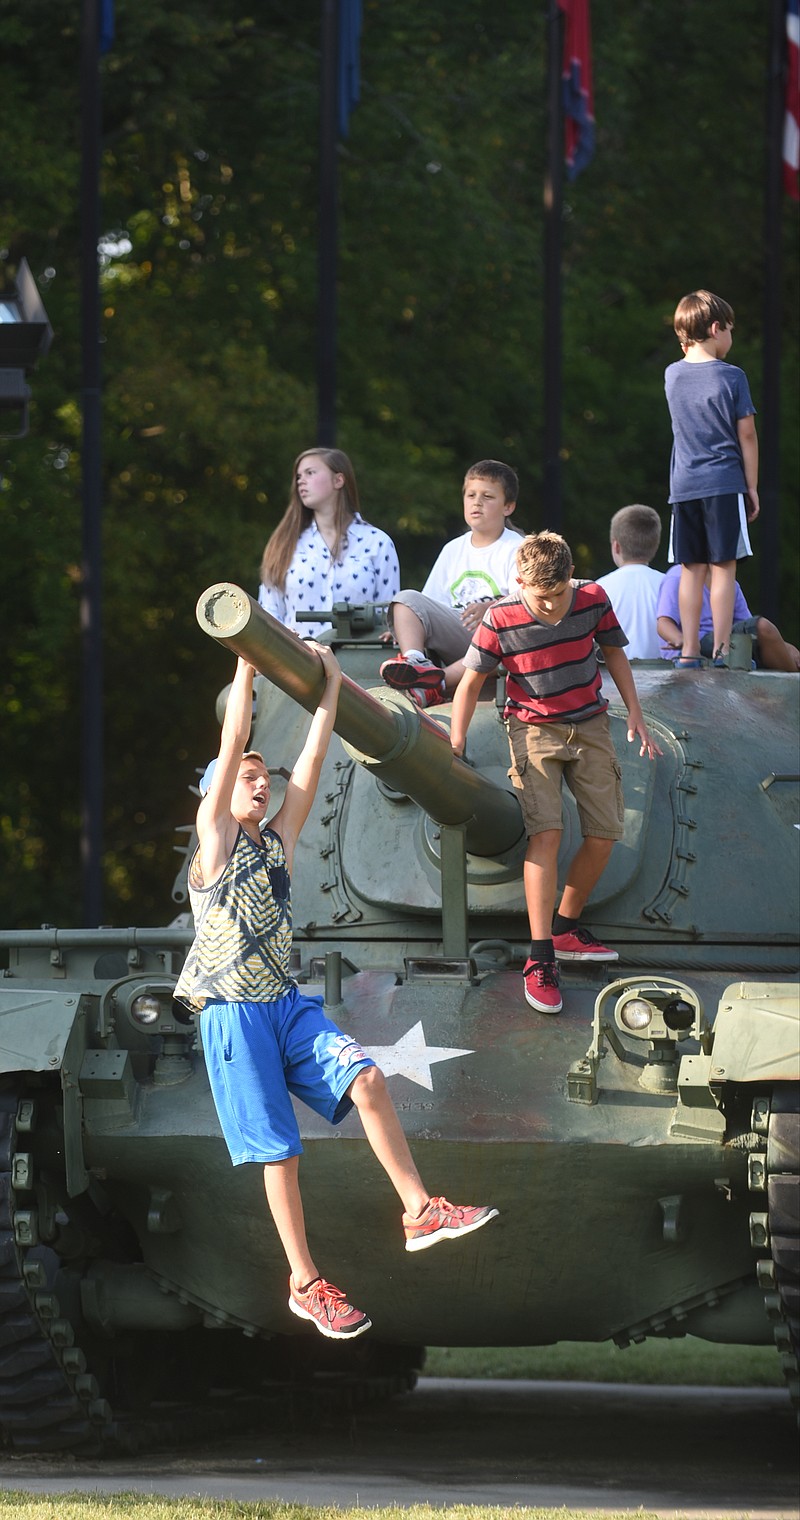 Alex Klischies hangs from a tank Monday, September 7, 2015 at the Labor Day celebration in Collegedale Veterans Memorial Park.